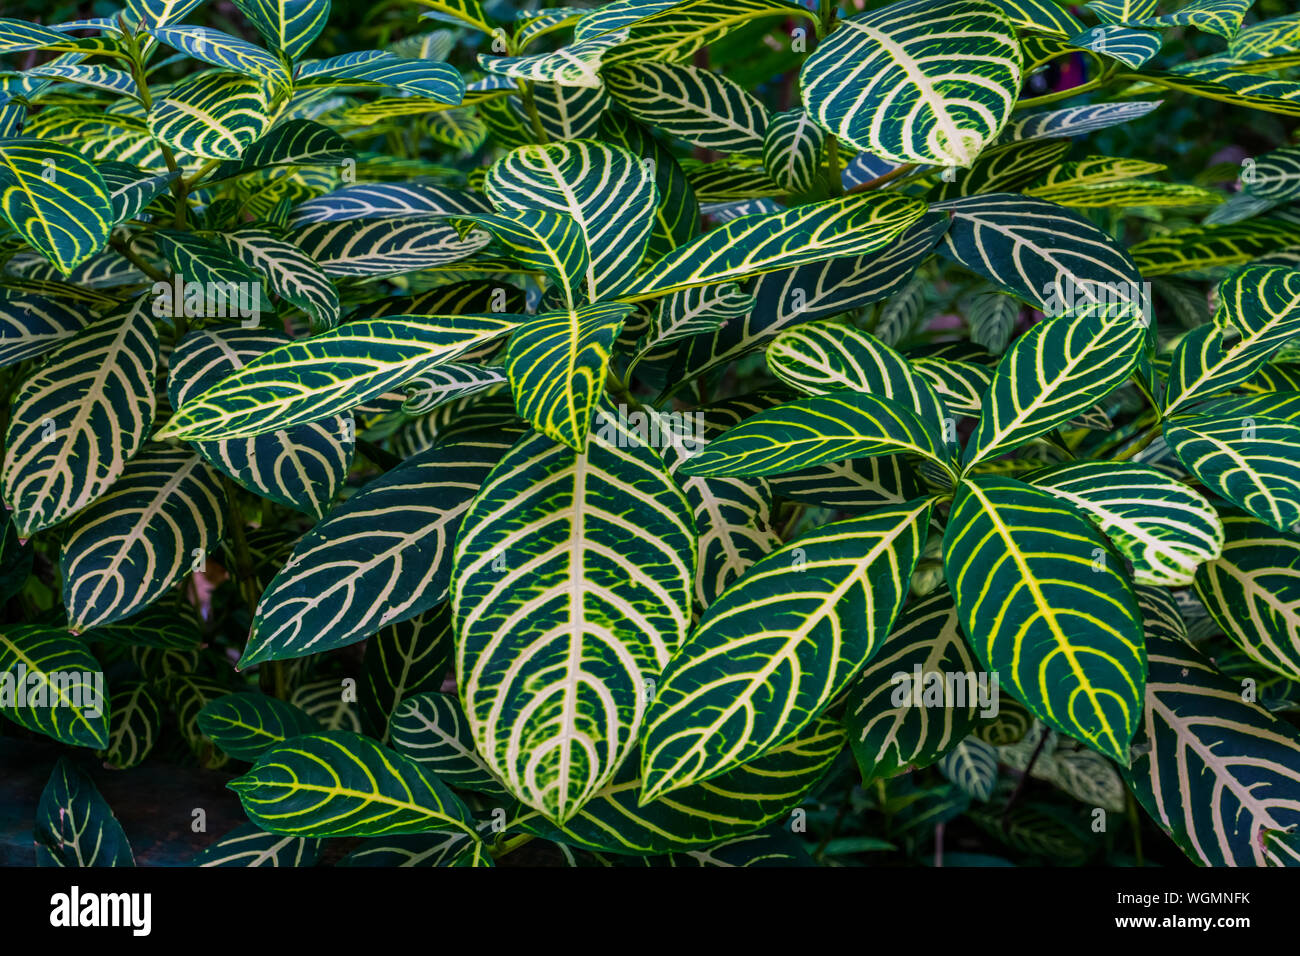 closeup of the leaves of a zebra plant, sanchezia species, natural background of green with yellow leaves, tropical garden plants Stock Photo